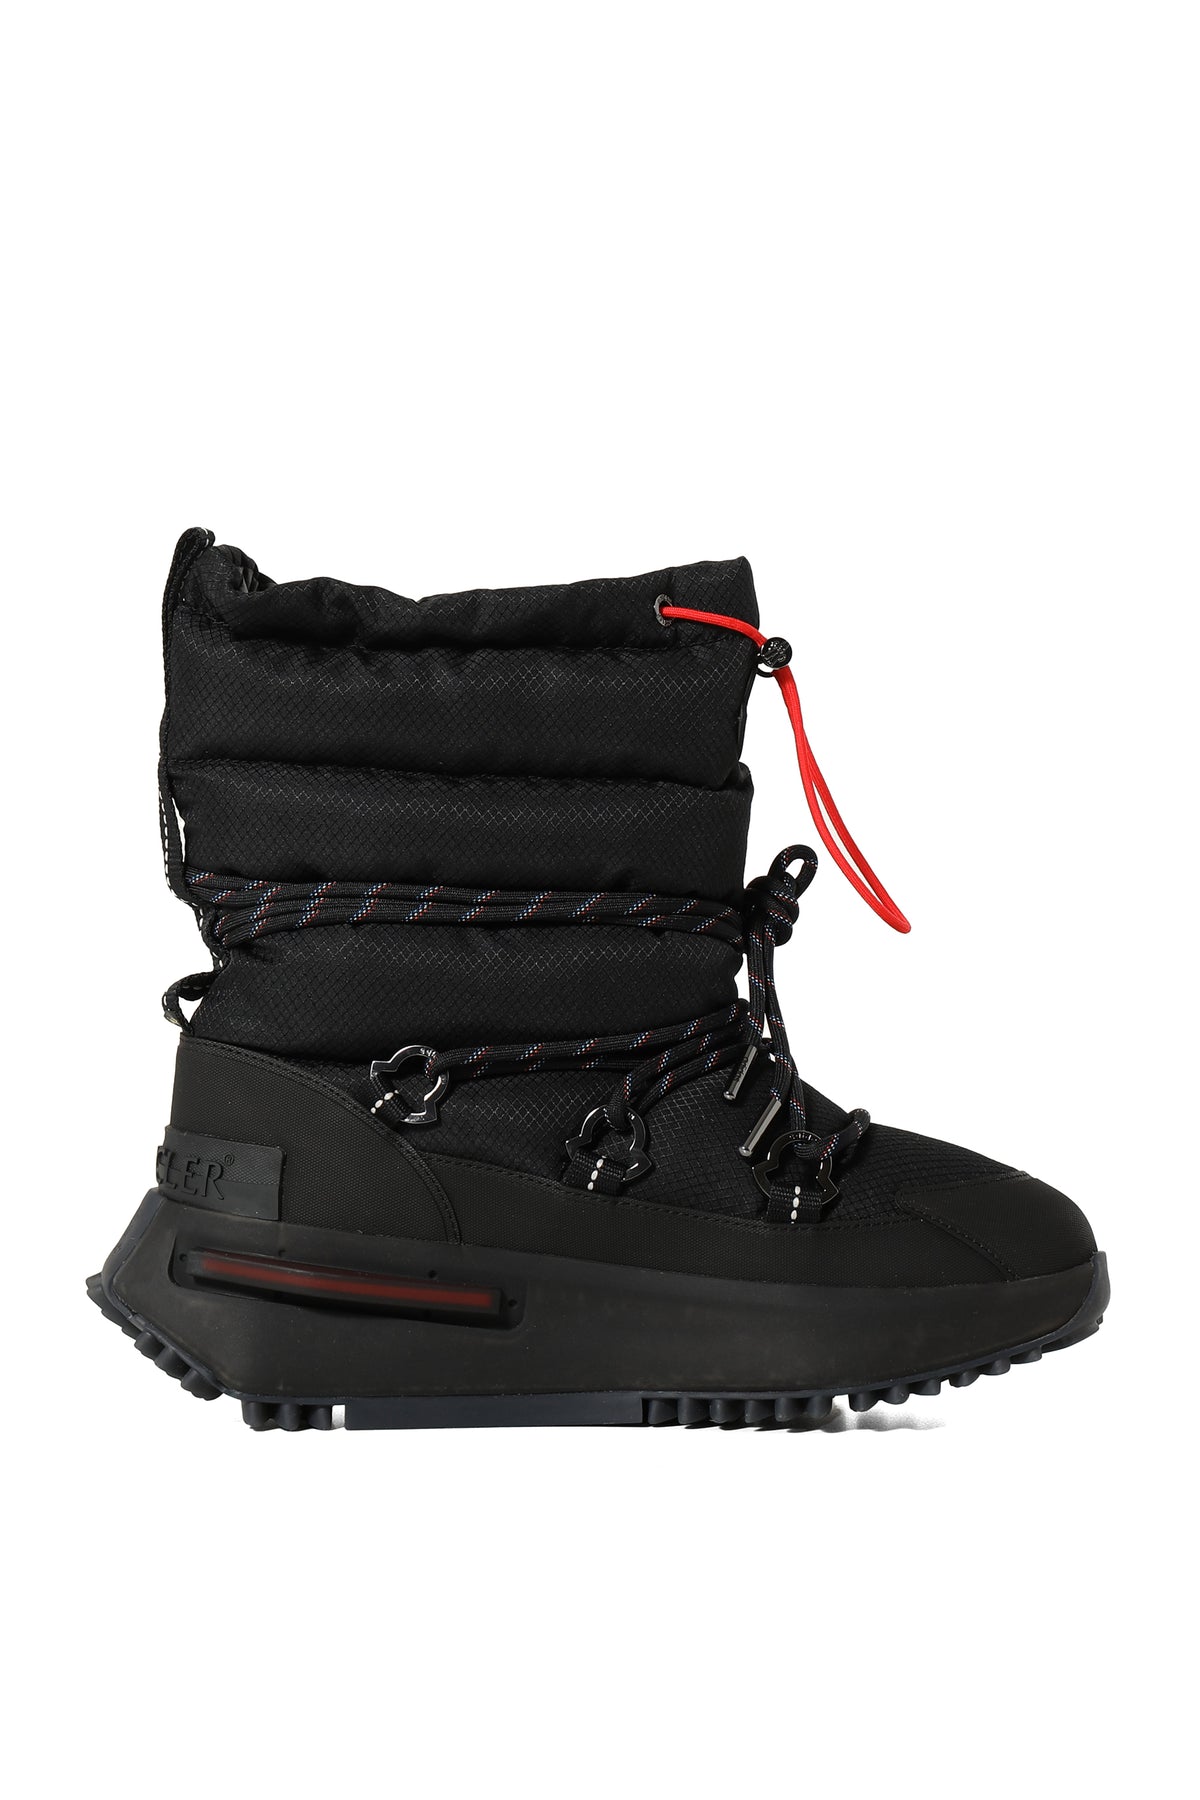 MONCLER NMD MID ANKLE BOOTS / BLK